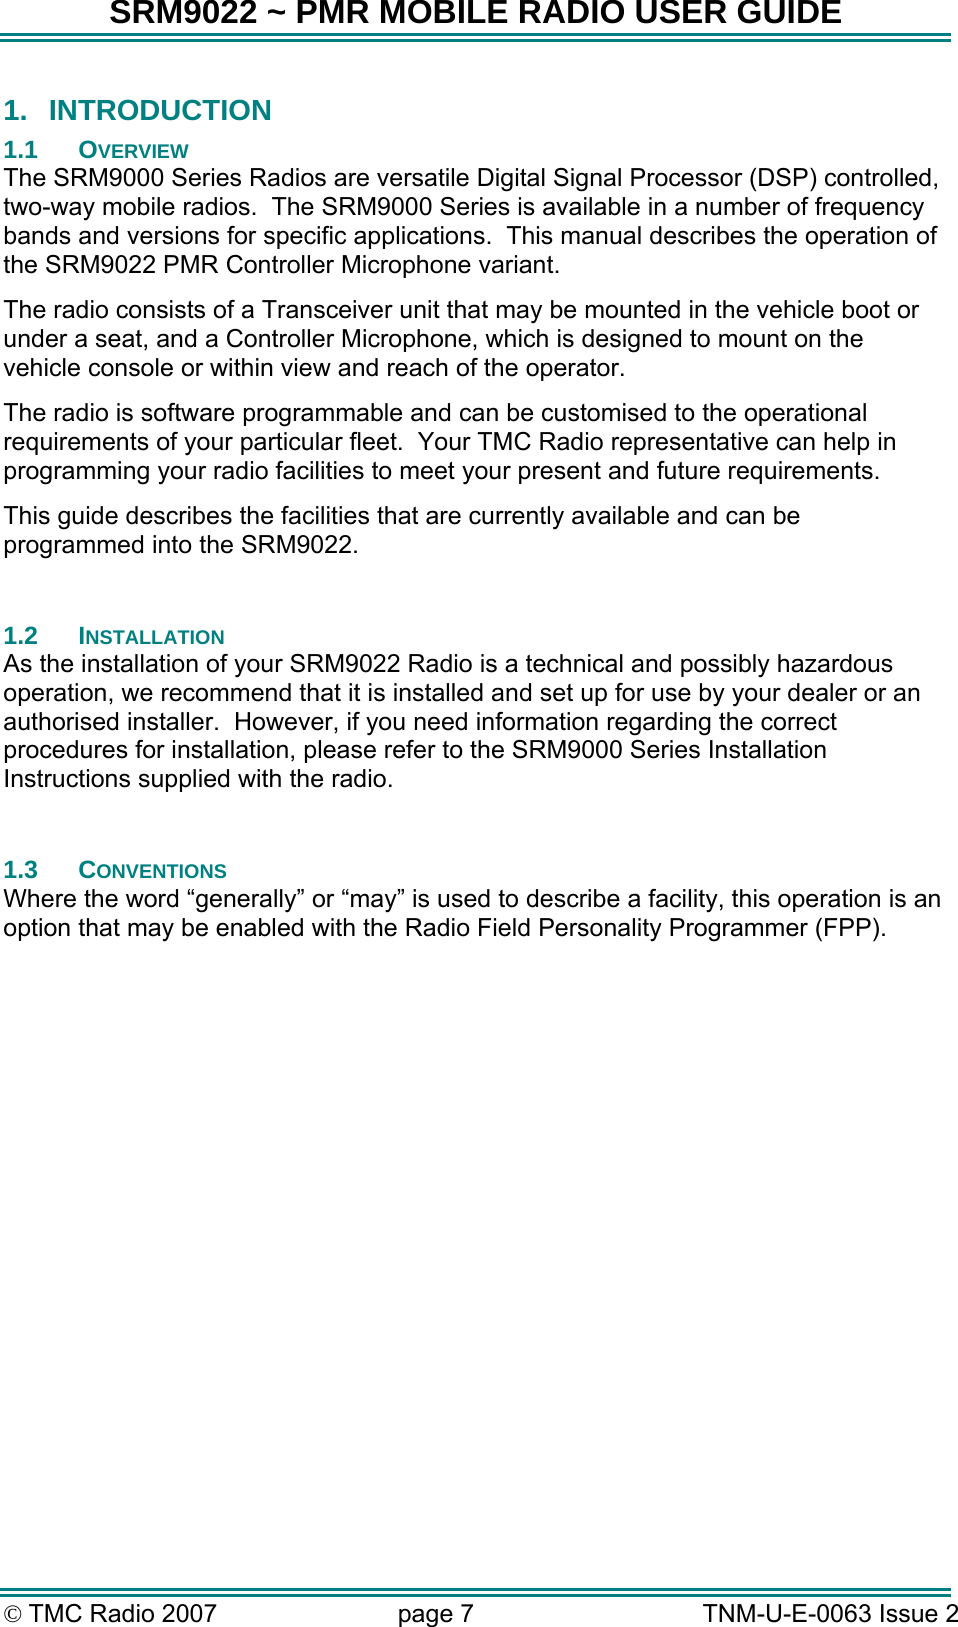 SRM9022 ~ PMR MOBILE RADIO USER GUIDE © TMC Radio 2007  page 7   TNM-U-E-0063 Issue 2 1.  INTRODUCTION 1.1 OVERVIEW The SRM9000 Series Radios are versatile Digital Signal Processor (DSP) controlled, two-way mobile radios.  The SRM9000 Series is available in a number of frequency bands and versions for specific applications.  This manual describes the operation of the SRM9022 PMR Controller Microphone variant. The radio consists of a Transceiver unit that may be mounted in the vehicle boot or under a seat, and a Controller Microphone, which is designed to mount on the vehicle console or within view and reach of the operator.   The radio is software programmable and can be customised to the operational requirements of your particular fleet.  Your TMC Radio representative can help in programming your radio facilities to meet your present and future requirements. This guide describes the facilities that are currently available and can be programmed into the SRM9022.  1.2 INSTALLATION As the installation of your SRM9022 Radio is a technical and possibly hazardous operation, we recommend that it is installed and set up for use by your dealer or an authorised installer.  However, if you need information regarding the correct procedures for installation, please refer to the SRM9000 Series Installation Instructions supplied with the radio.  1.3 CONVENTIONS Where the word “generally” or “may” is used to describe a facility, this operation is an option that may be enabled with the Radio Field Personality Programmer (FPP).  